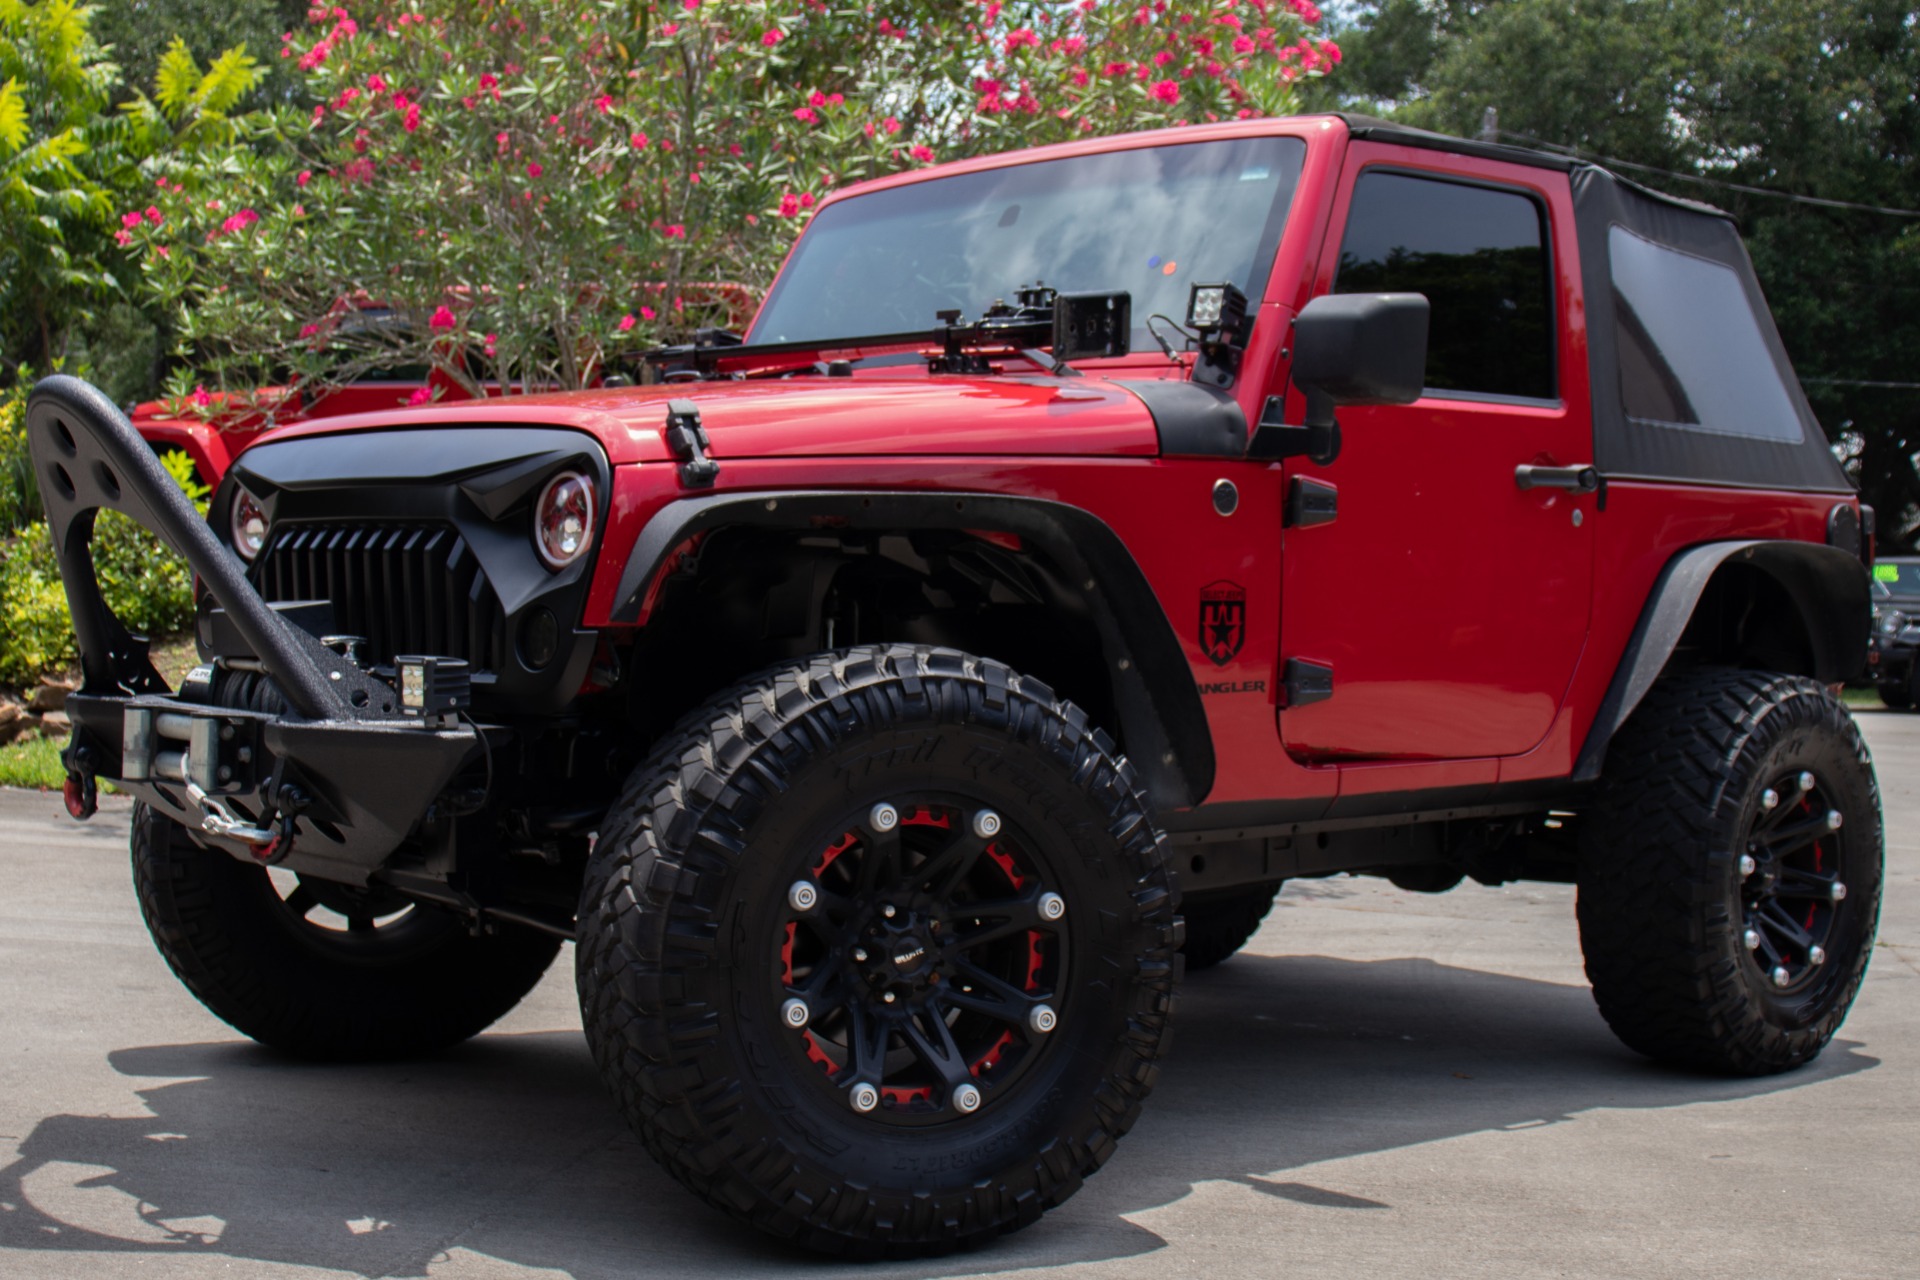 Used 2011 Jeep Wrangler Sport For Sale ($19,995) | Select Jeeps Inc ...